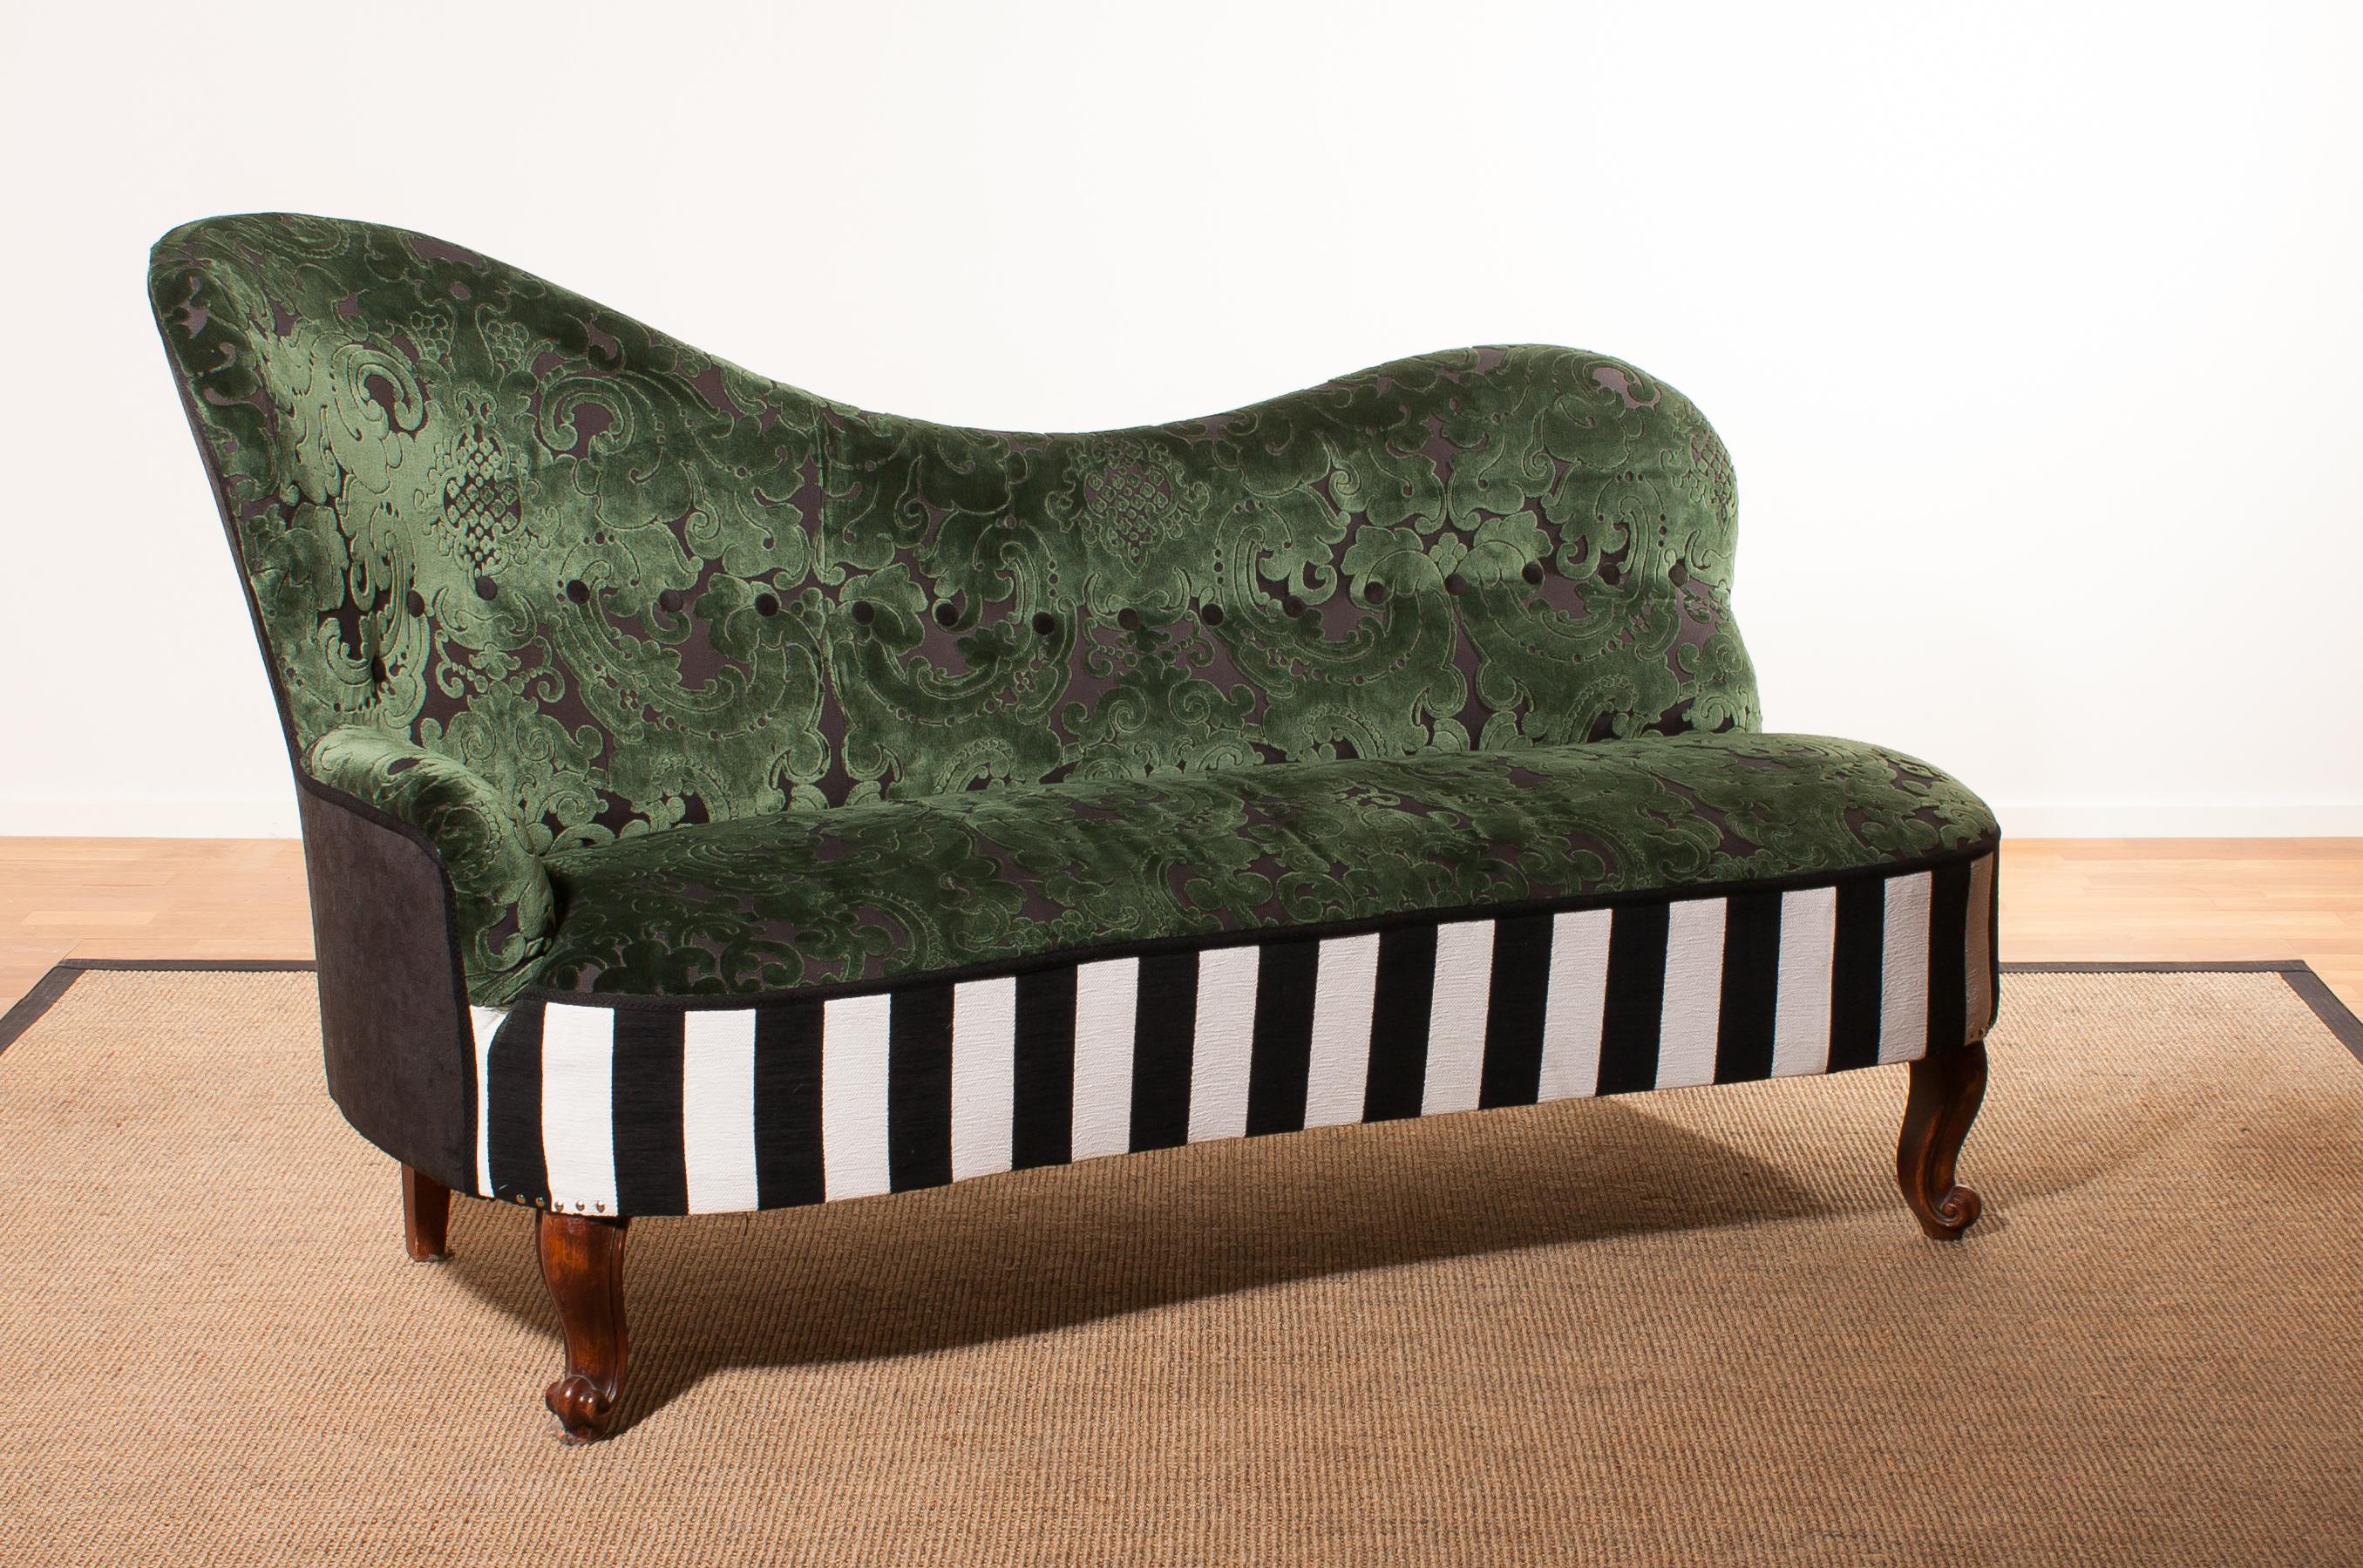 A very beautiful sofa or daybed.
This chaise longue is reupholstered with a green jacquard velvet and a black and white stripe velours fabric.
It is in wonderful condition.
Period 1950s
Dimensions: H 100 cm, W 170 cm, D 75 cm, SH 44 cm.